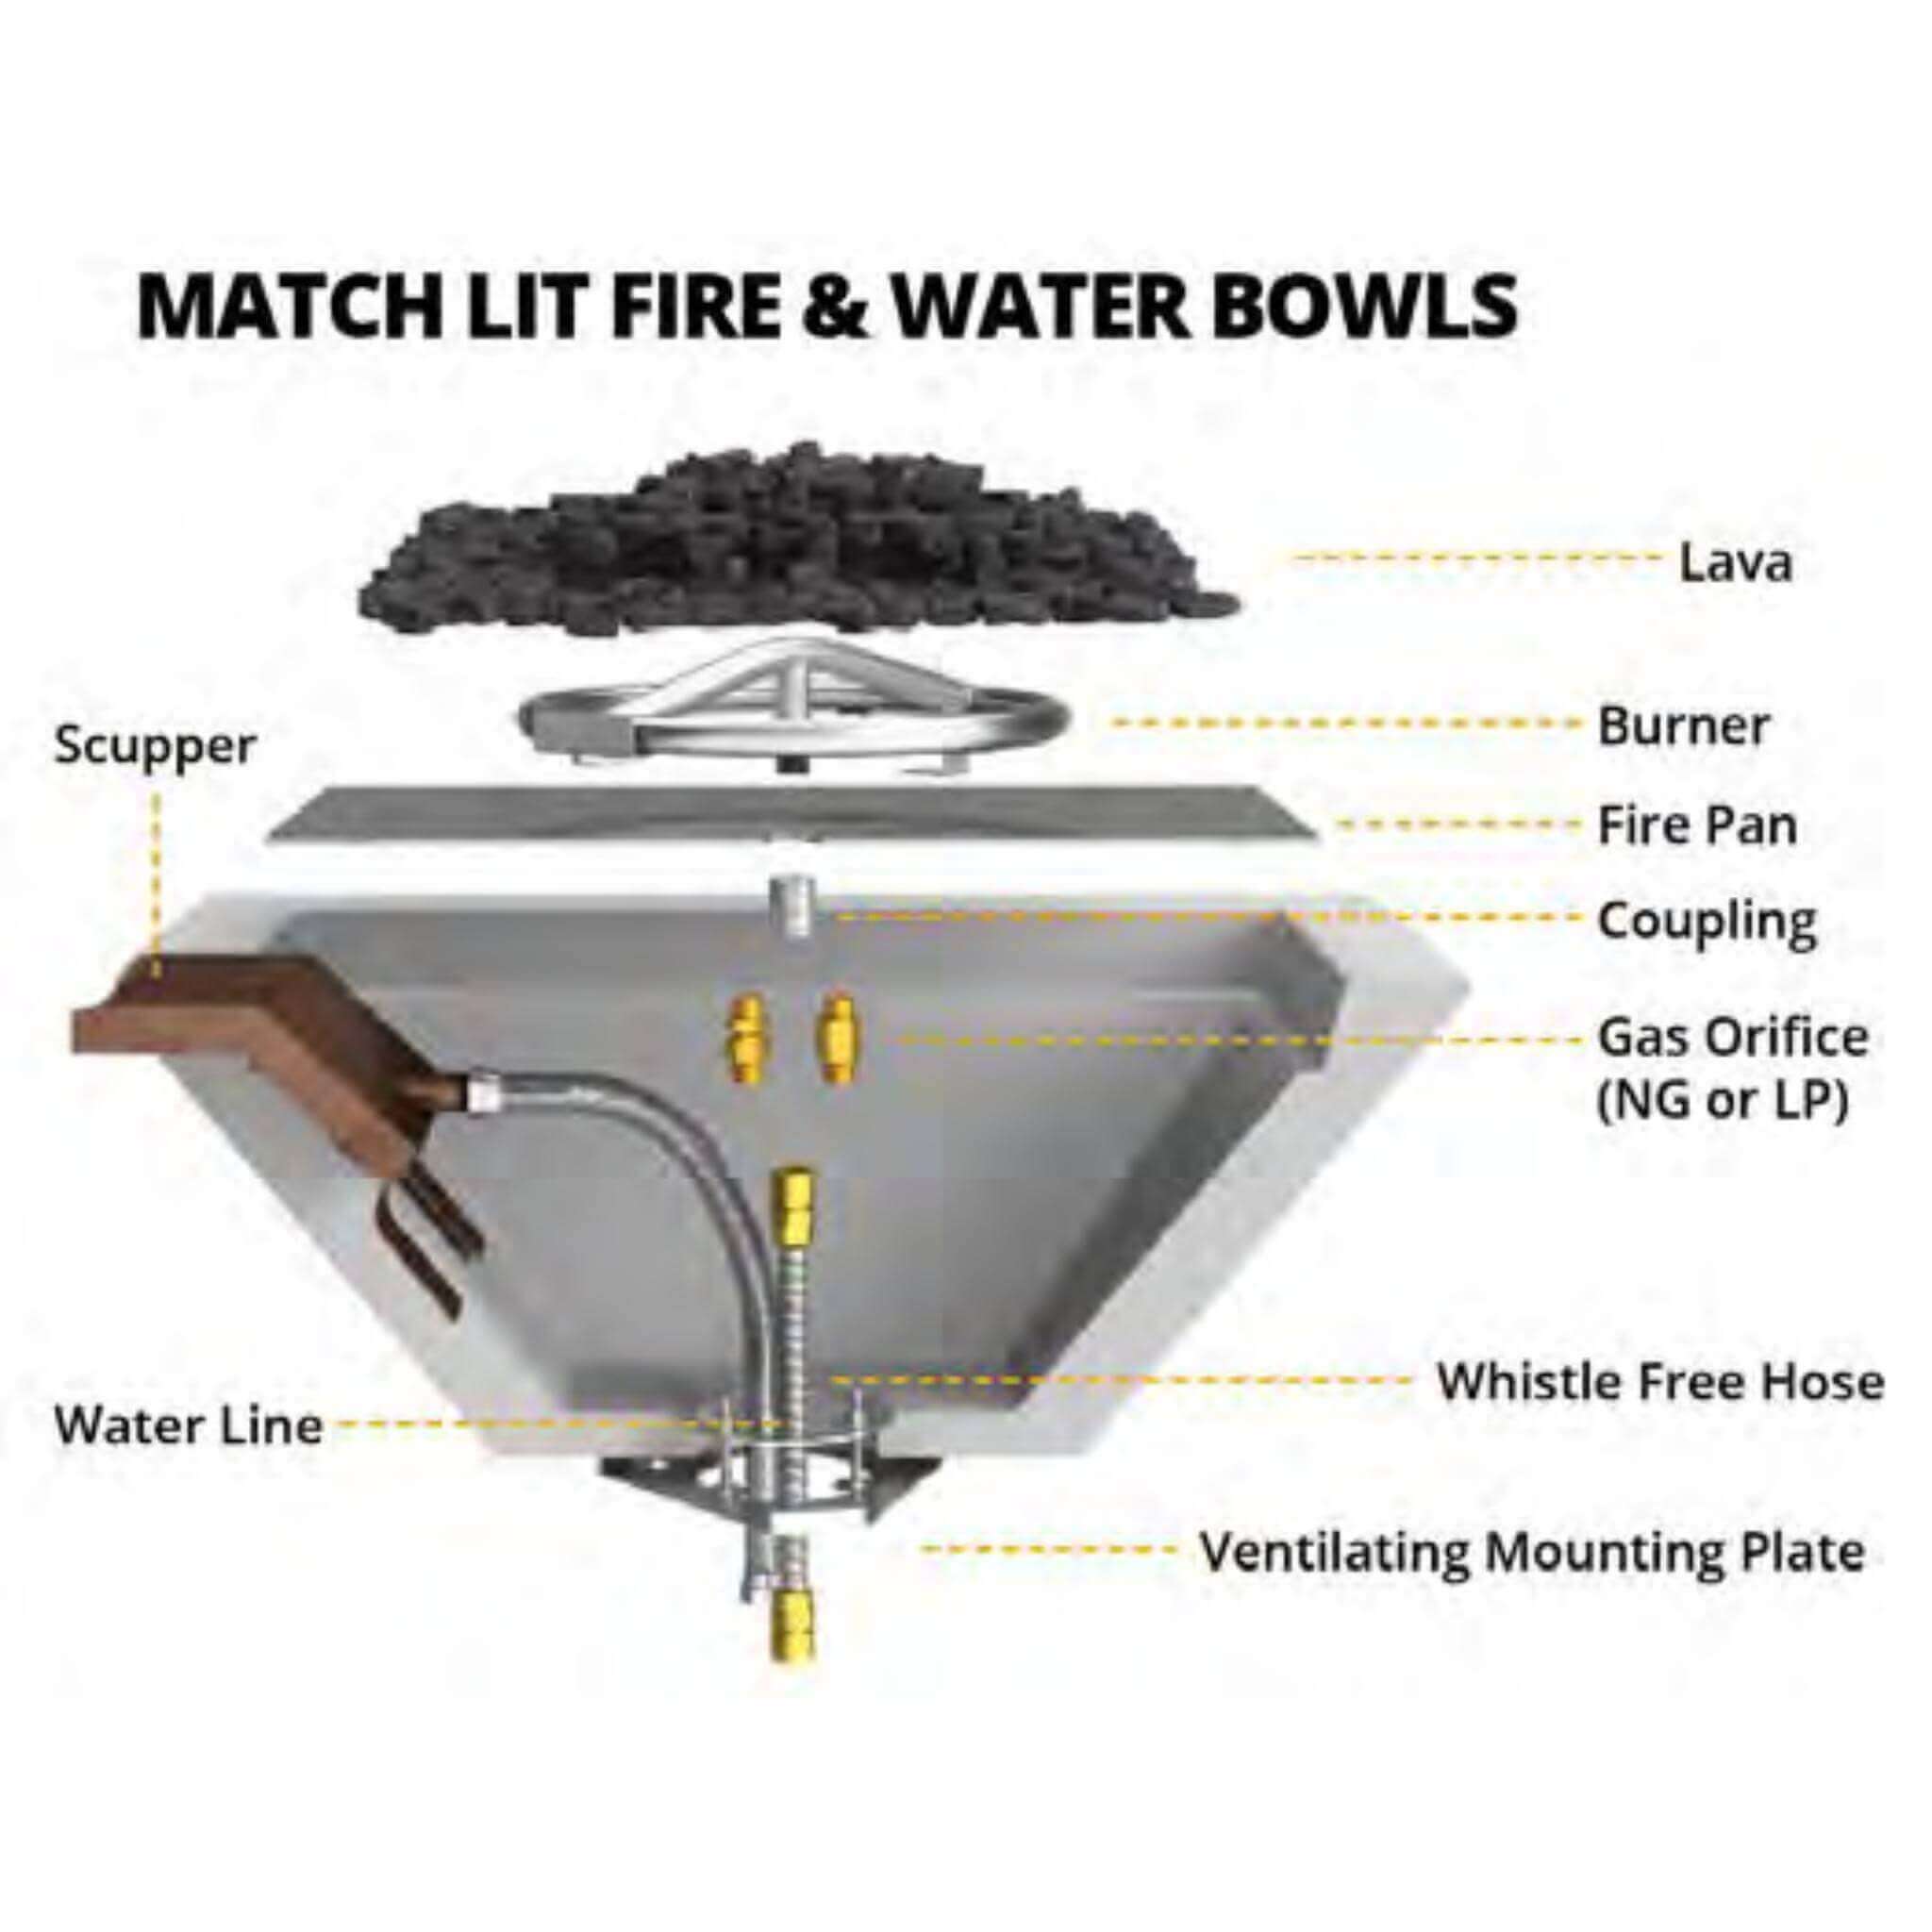 "Maya" Wide Gravity Spill Stainless Steel Fire & Water Bowl - The Outdoor Plus